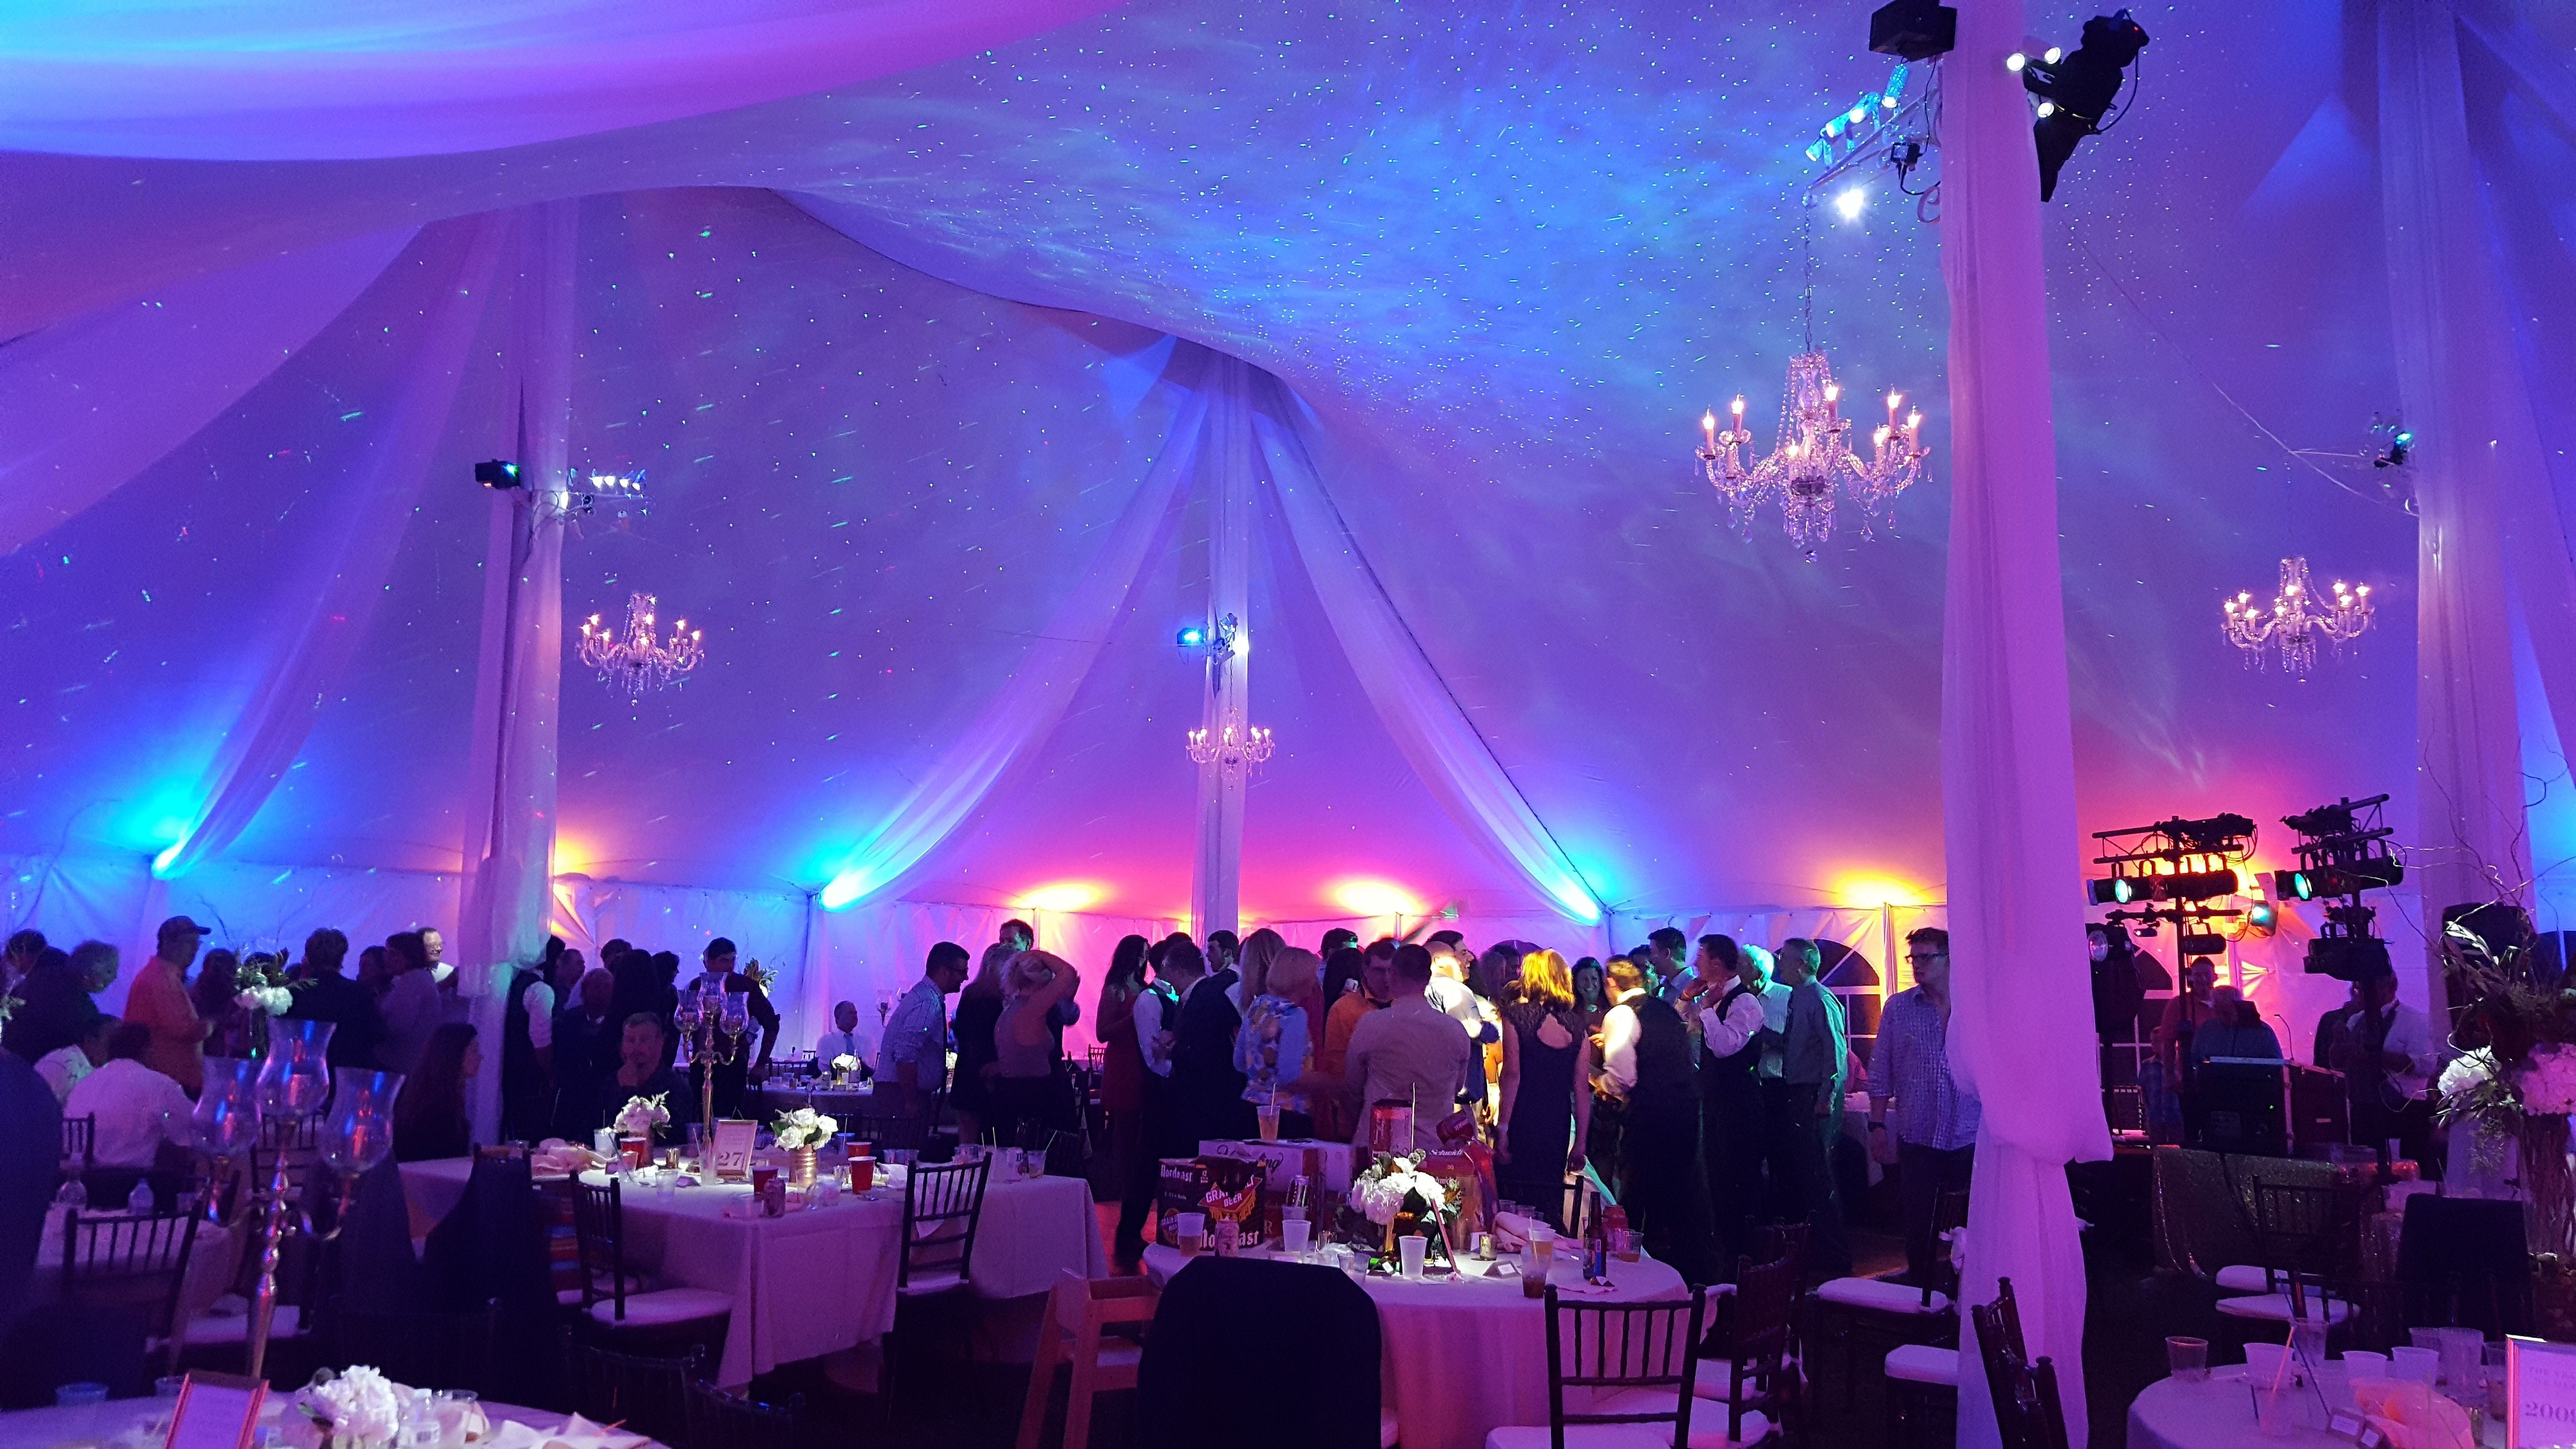 Wedding lighting in a tent. Up litghting in blue and orange, stars and Northern Lights on the ceiling. decor by @thevaultdultuh